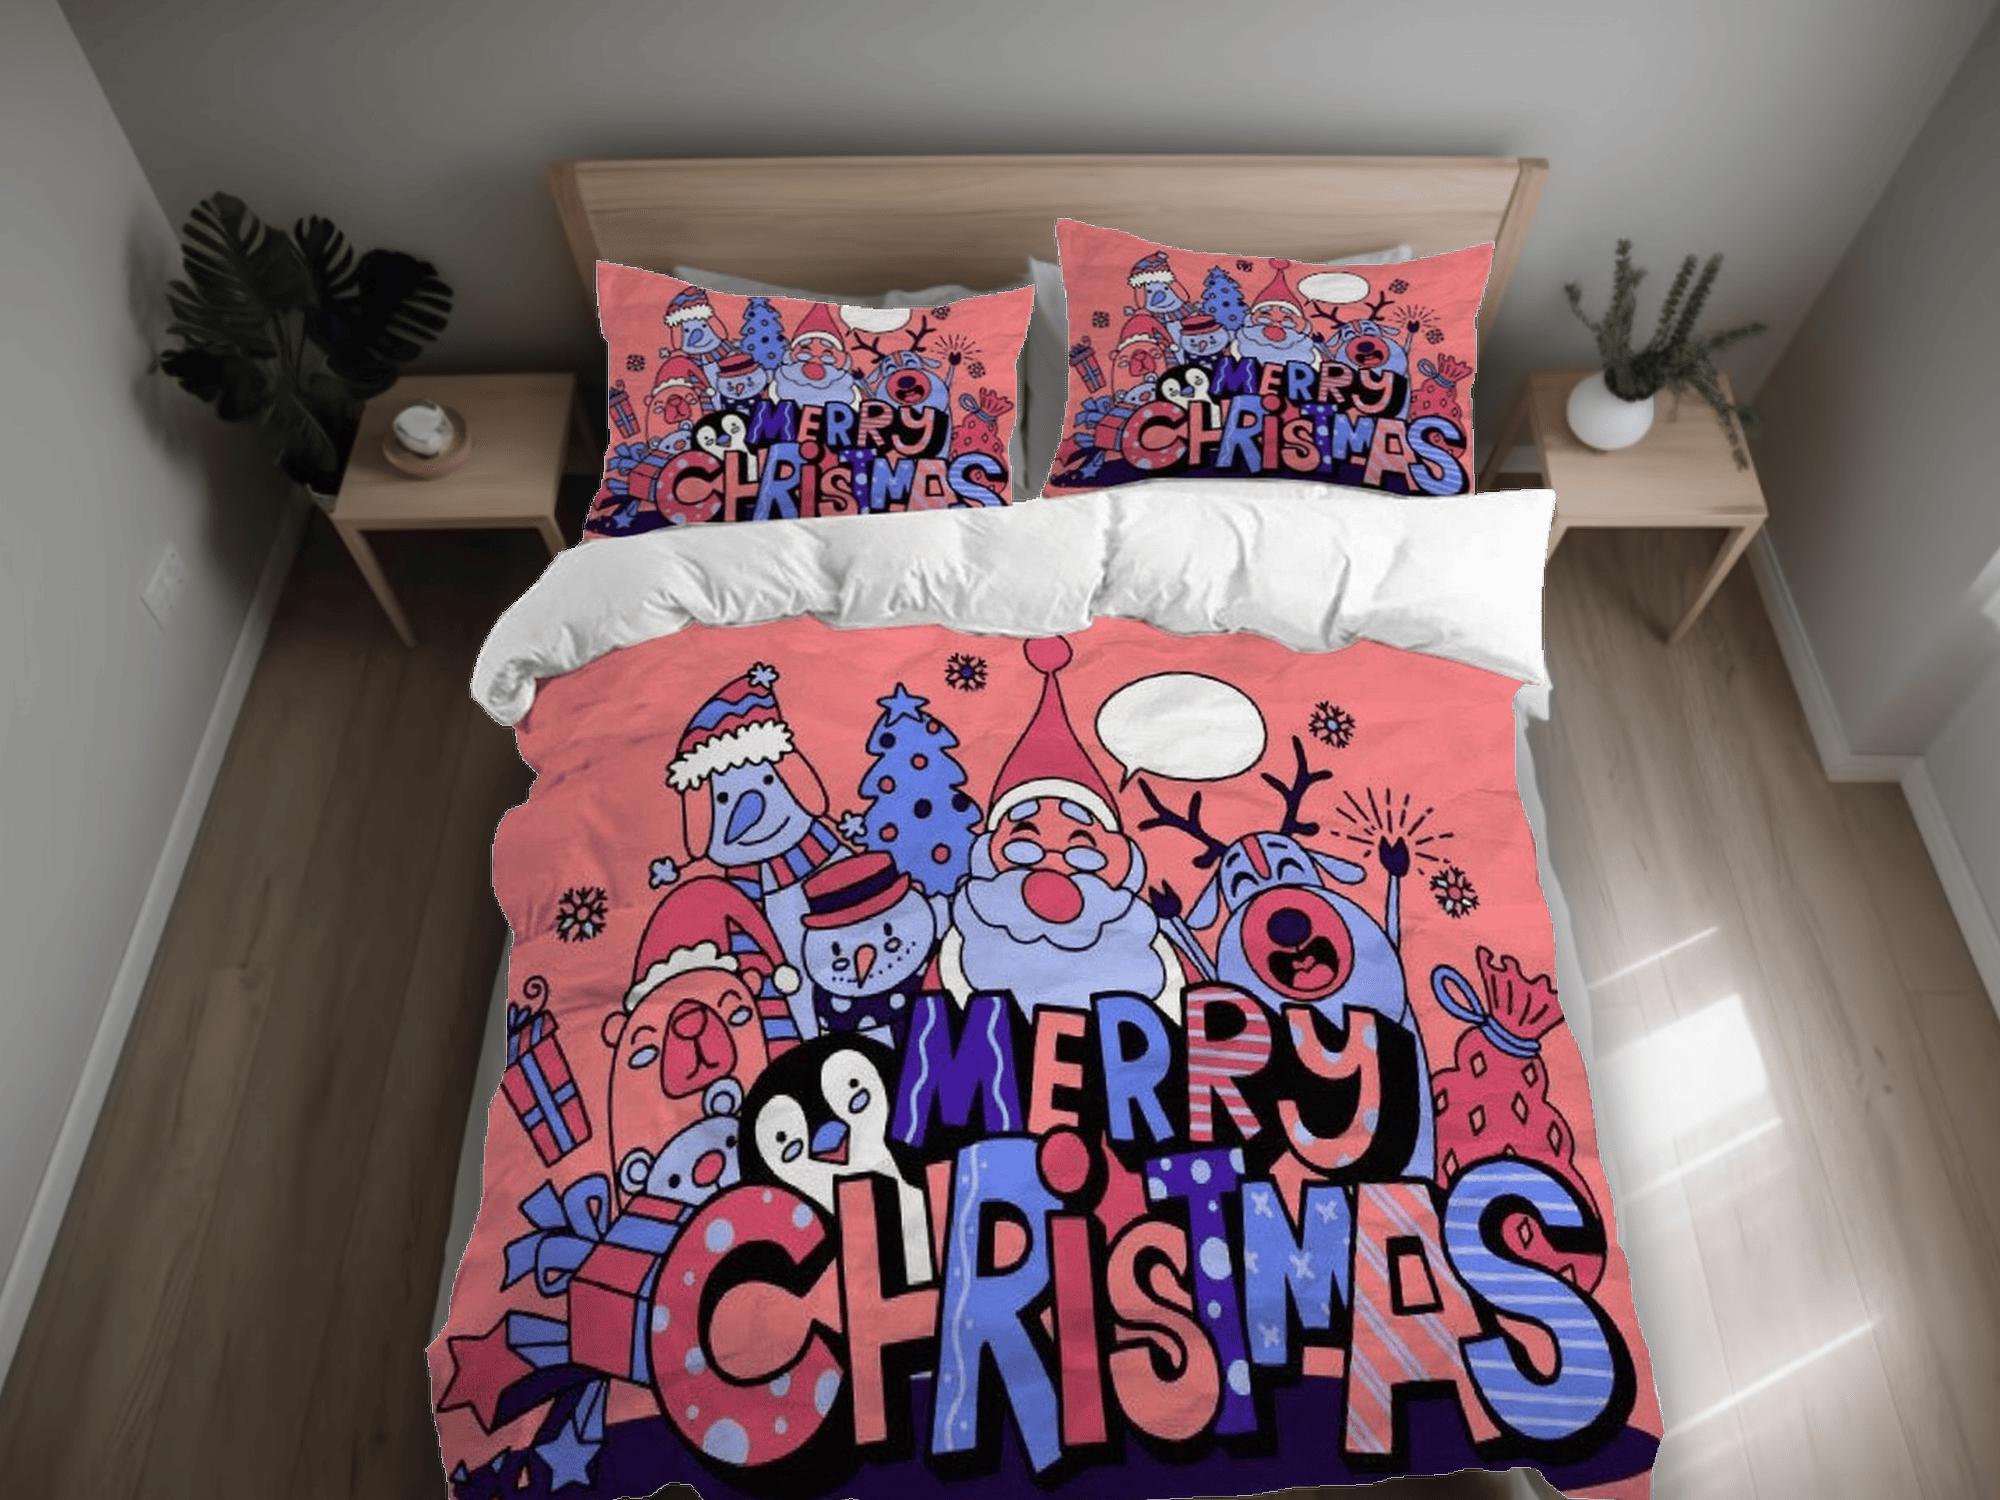 daintyduvet Friends Merry Christmas bedding & pillowcase holiday gift coral duvet cover king queen full twin toddler bedding baby Christmas farmhouse